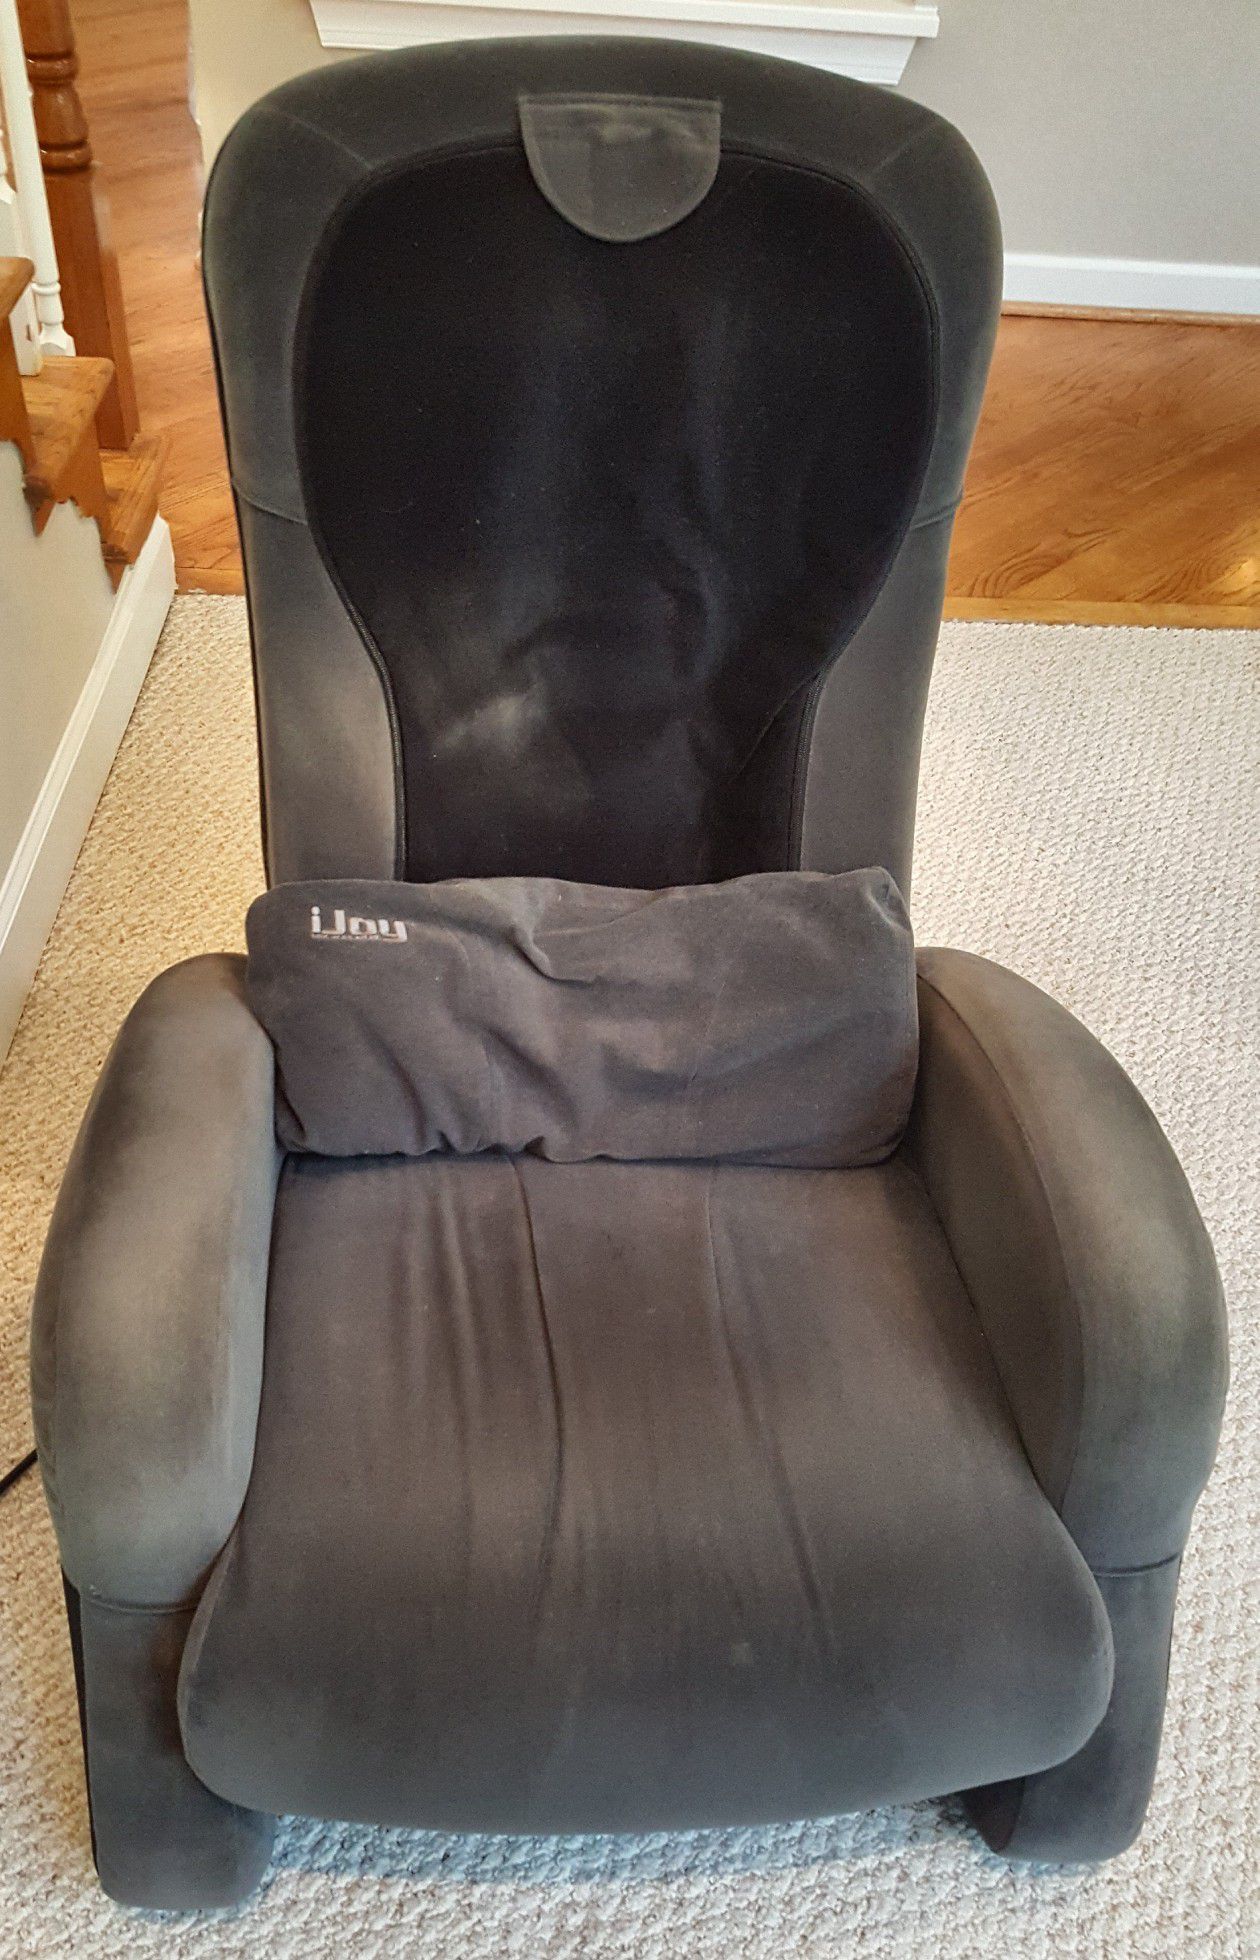 Excellent Condition iJoy Massage Chair in Black & Grey